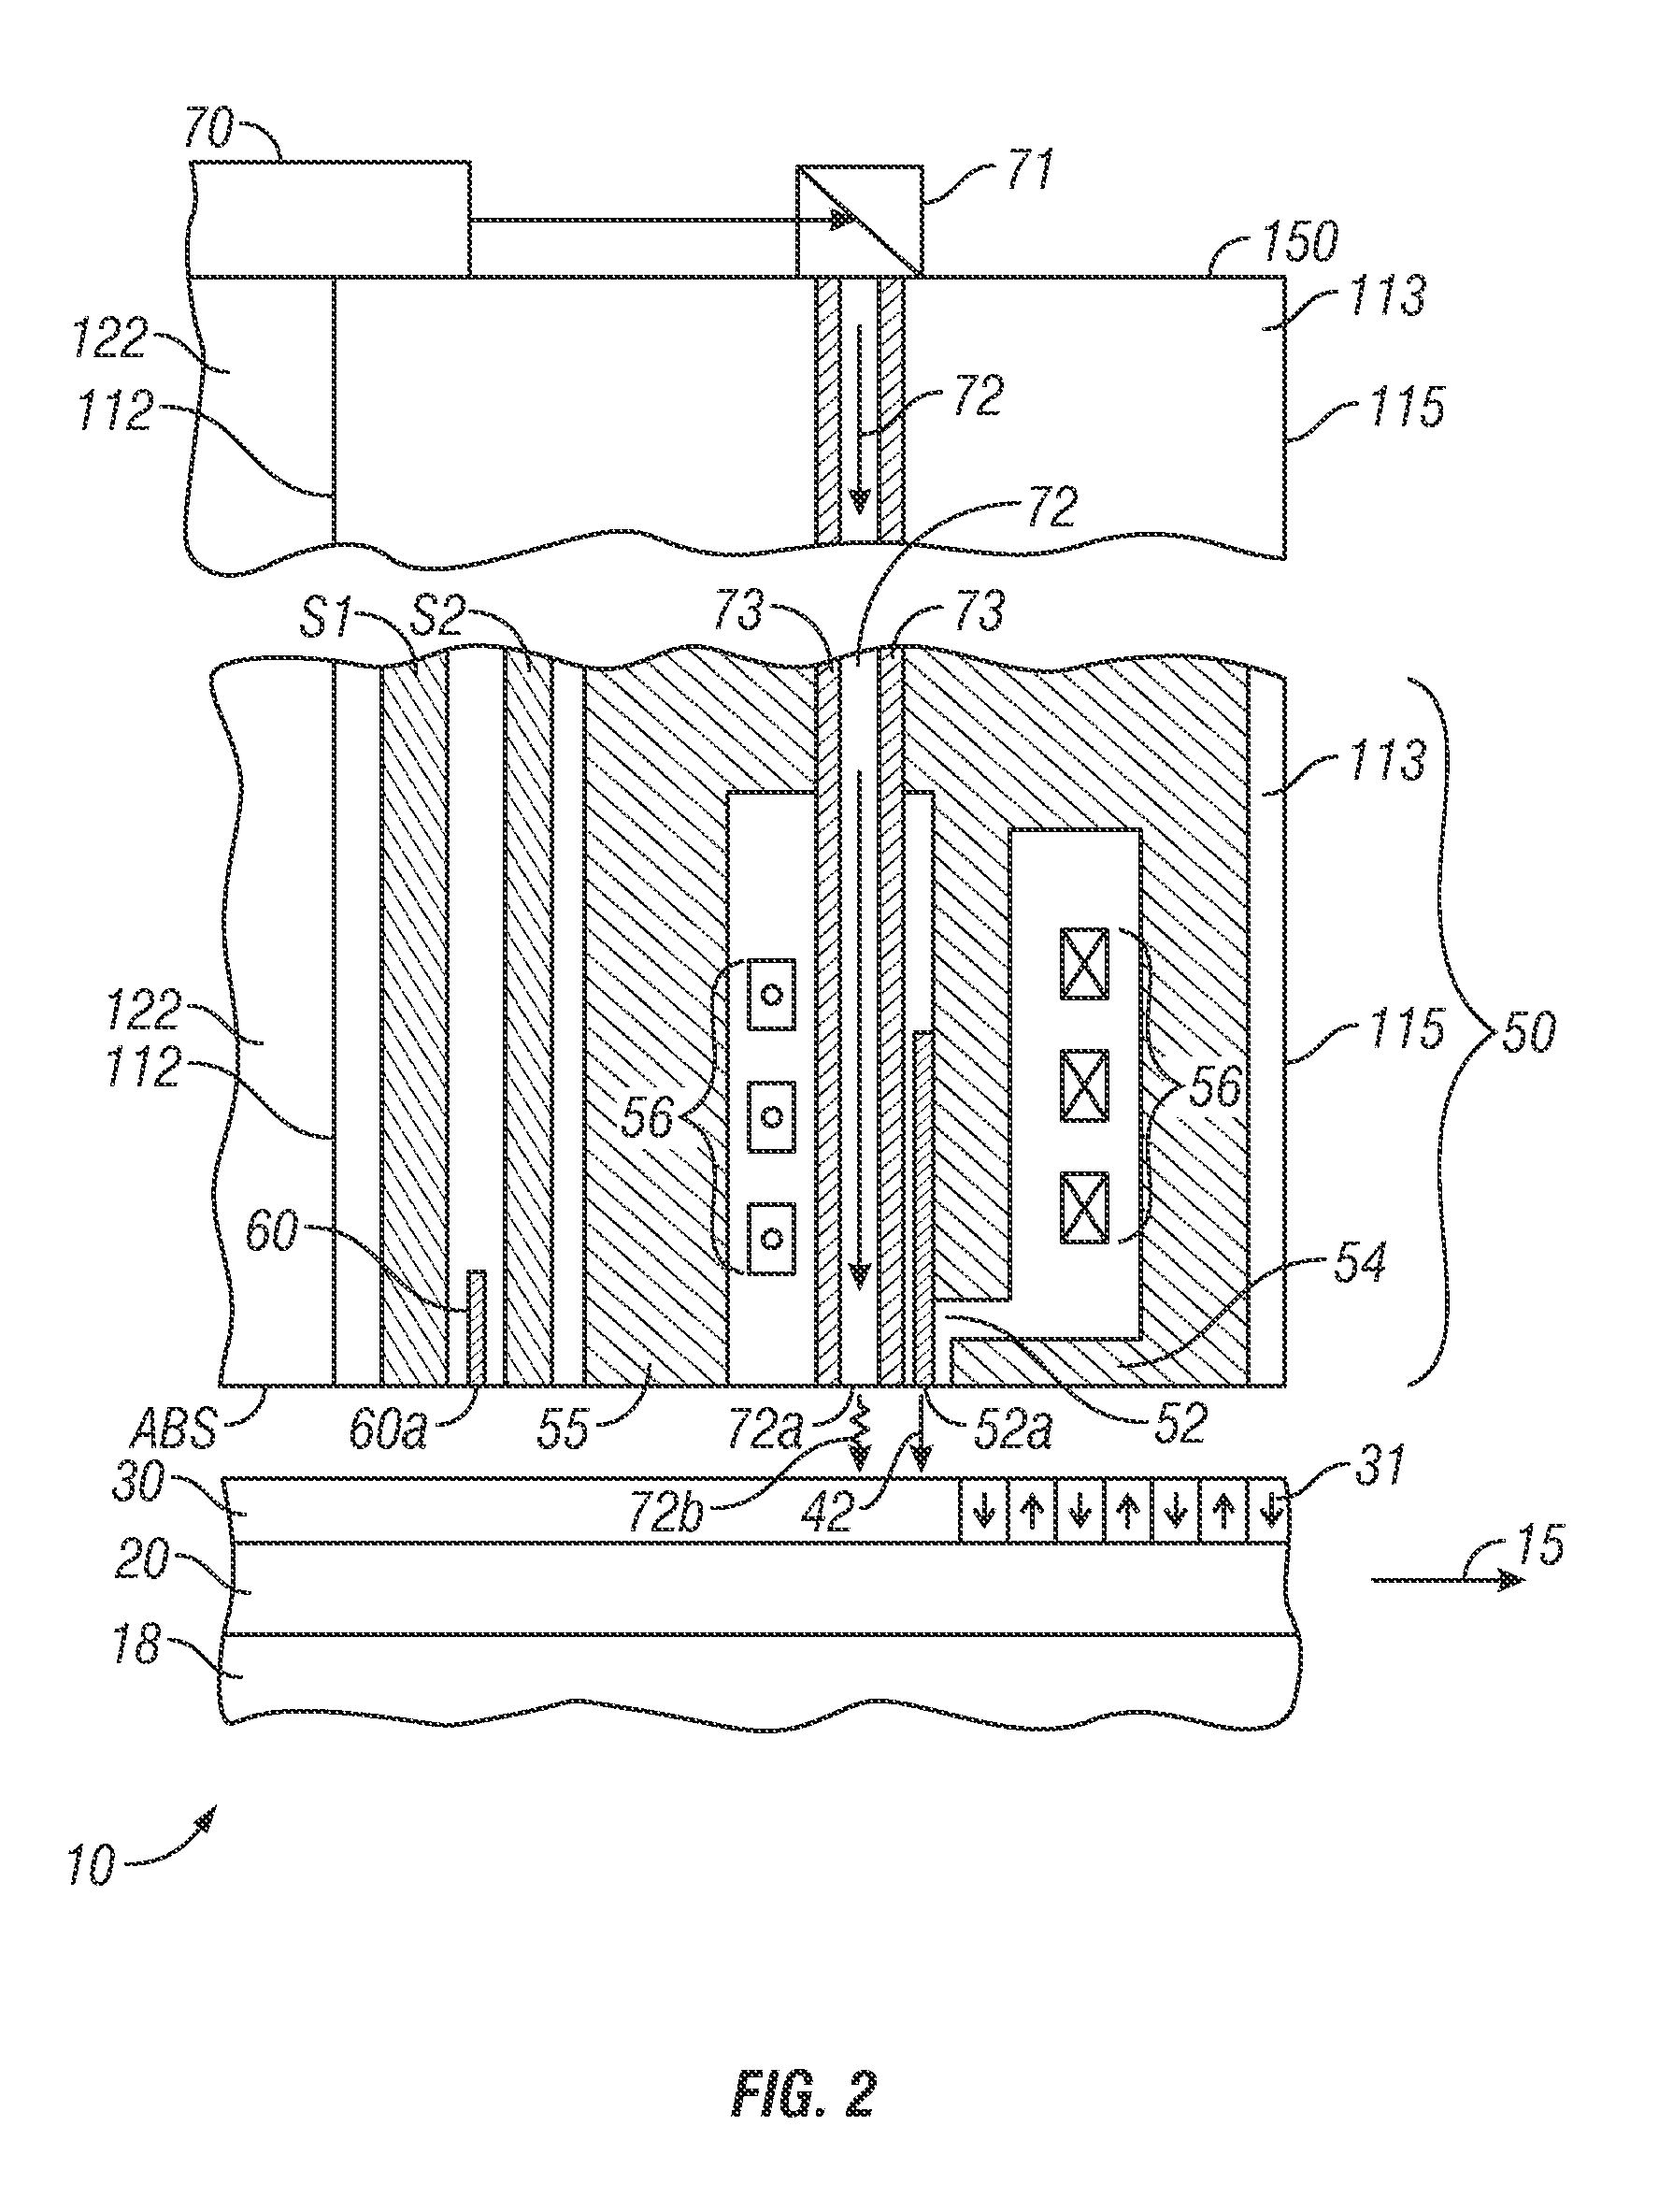 Magnetic recording disk drive with shingled writing and wide-area thermal assistance